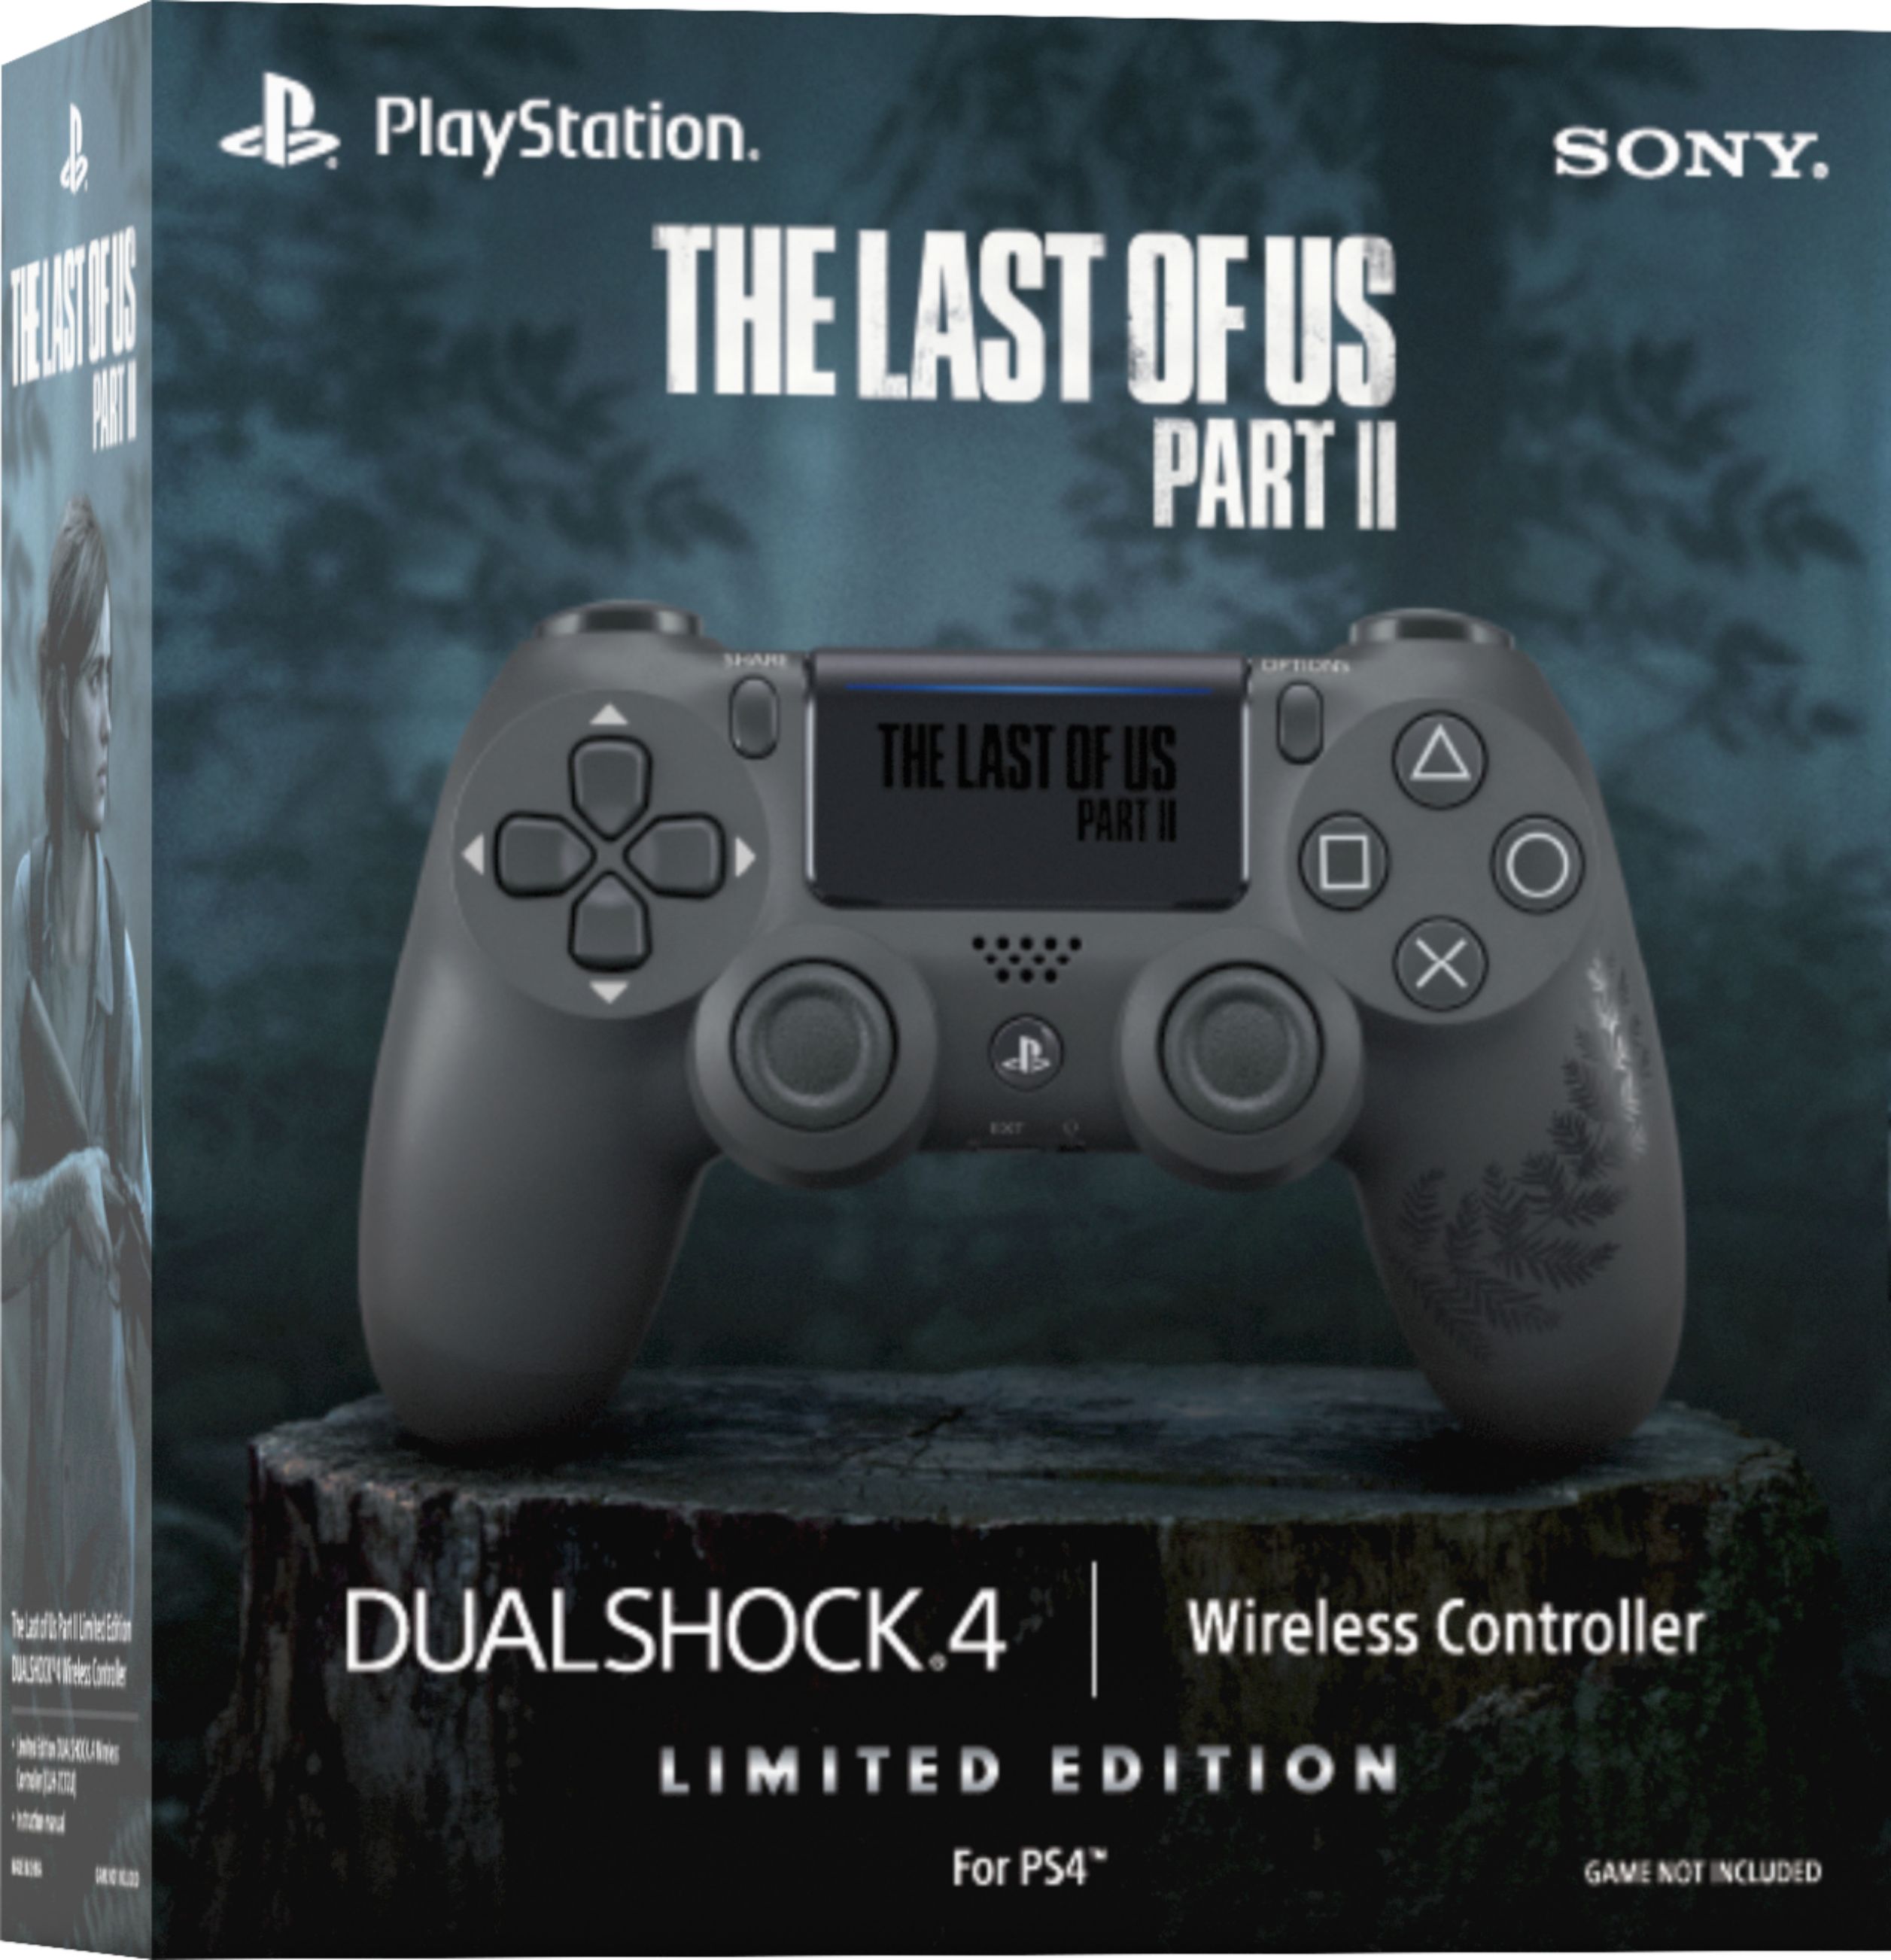 Jogo PS4 The Last of Us II (Special Edition)